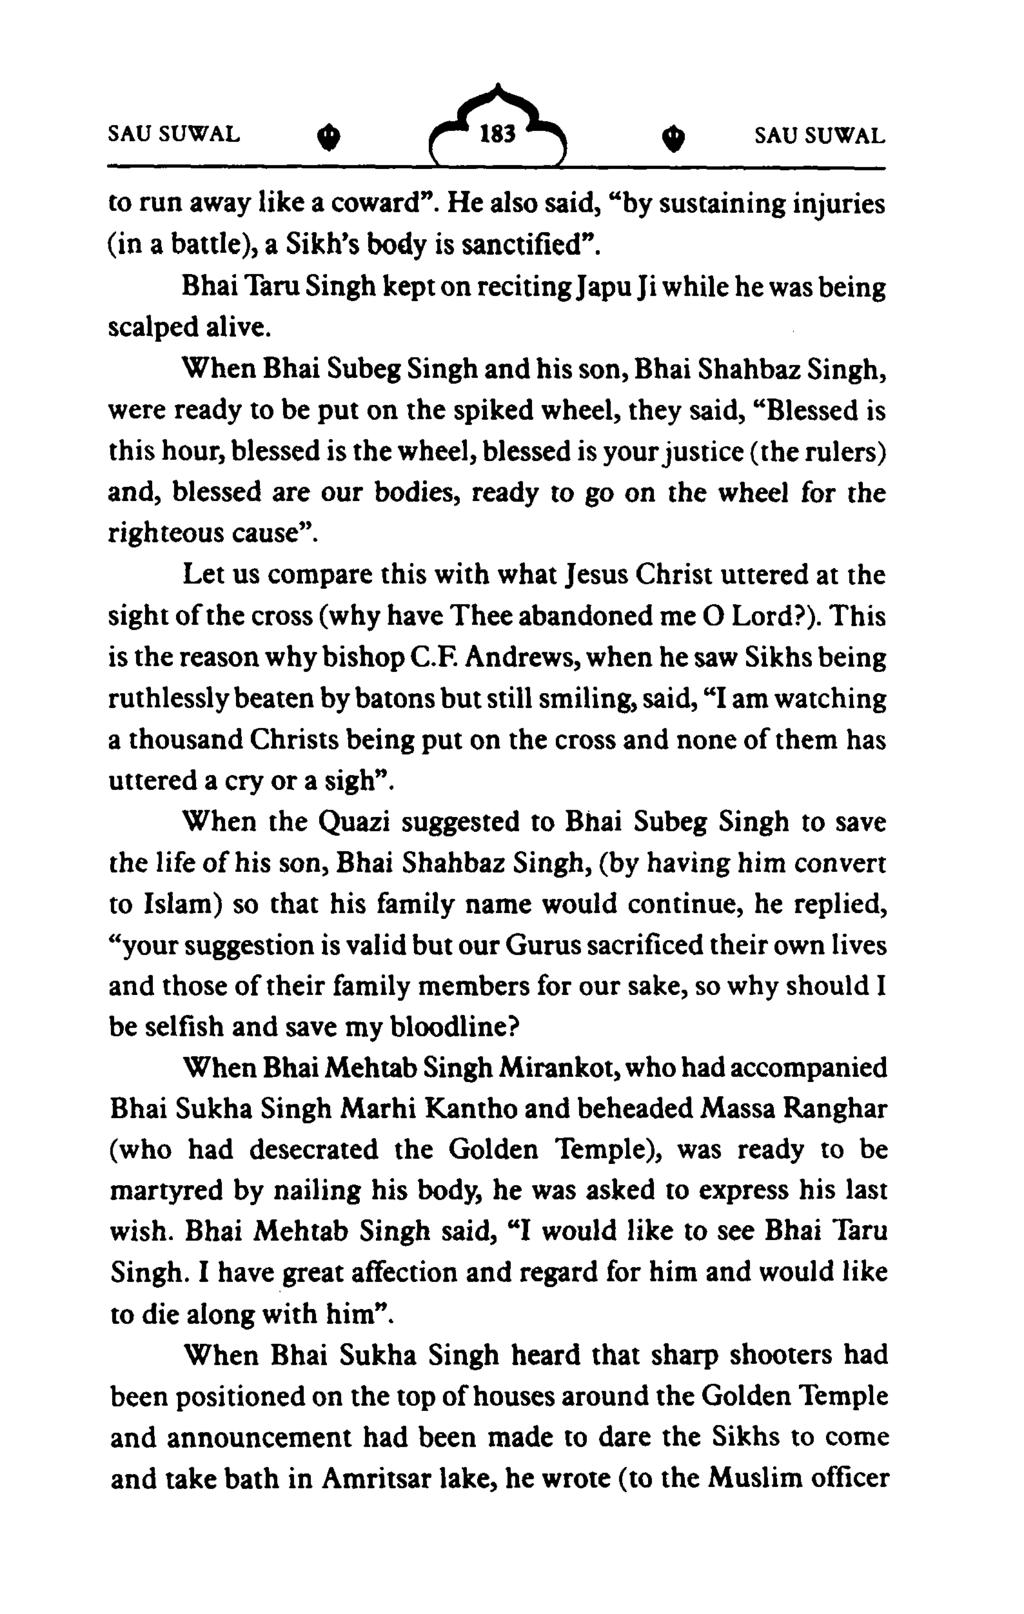 A to run away like a coward". He also said, "by sustaining injuries (in a battie), a Sikh's body is sanctified". Bhai Taru Singh kept on recitingjapu Ji while he was being scalped alive.